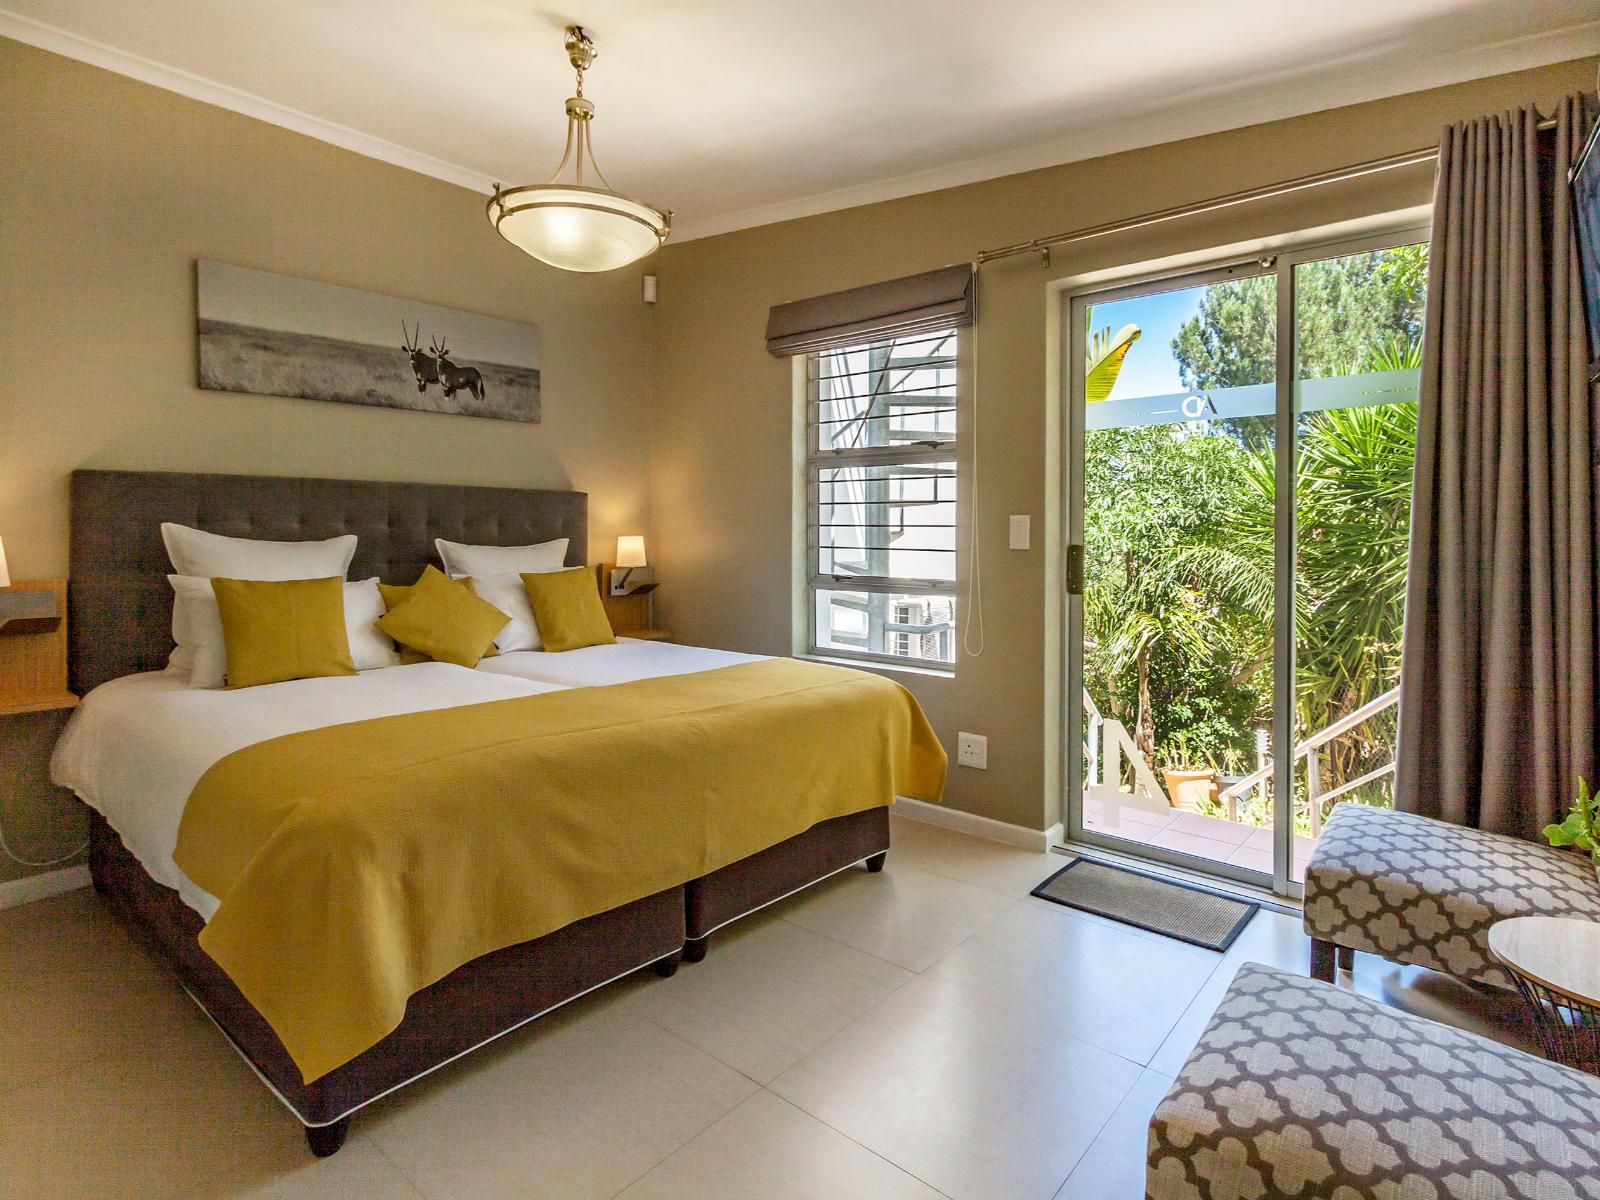 African Dreams Fairview Heights Somerset West Western Cape South Africa Palm Tree, Plant, Nature, Wood, Bedroom